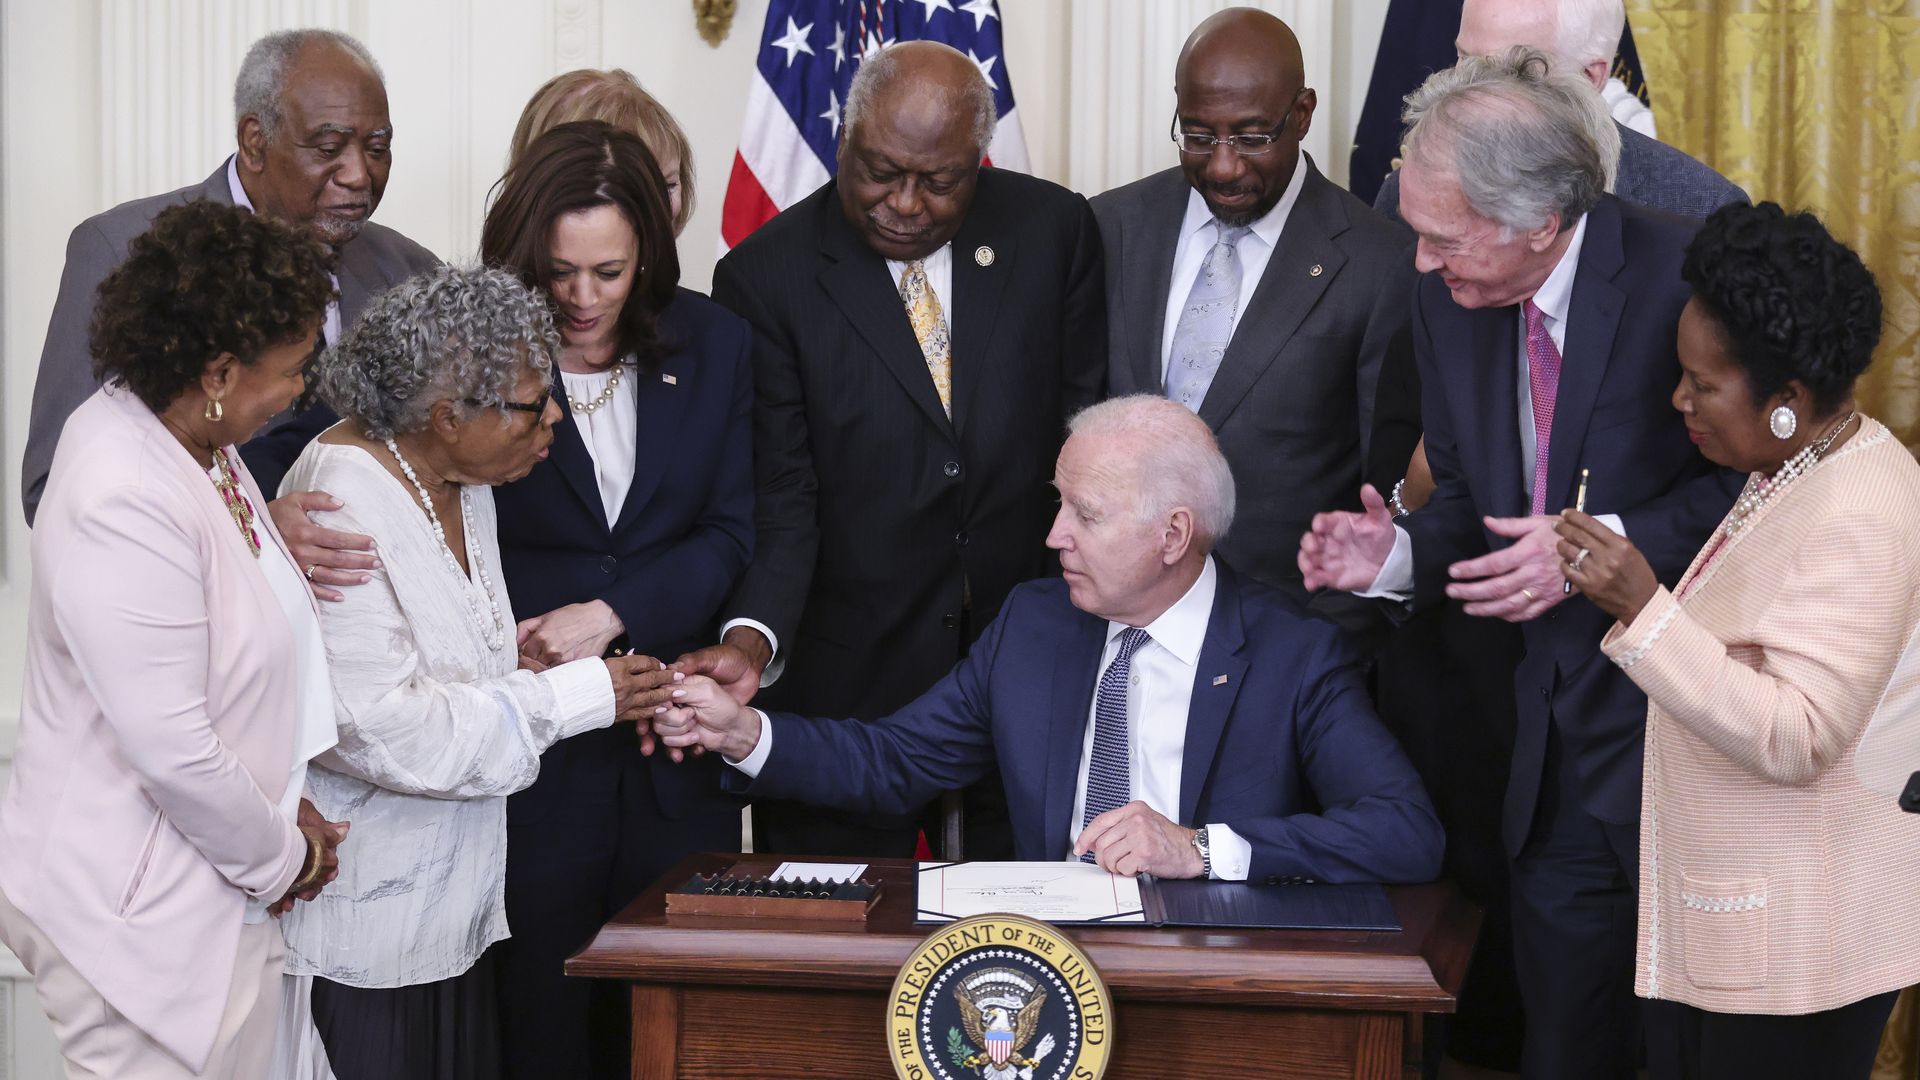 President Biden is seen handing a pen to Opal Lee, the so-called "Grandmother of Juneteenth," after he signed a bill making that occasion a federal holiday.